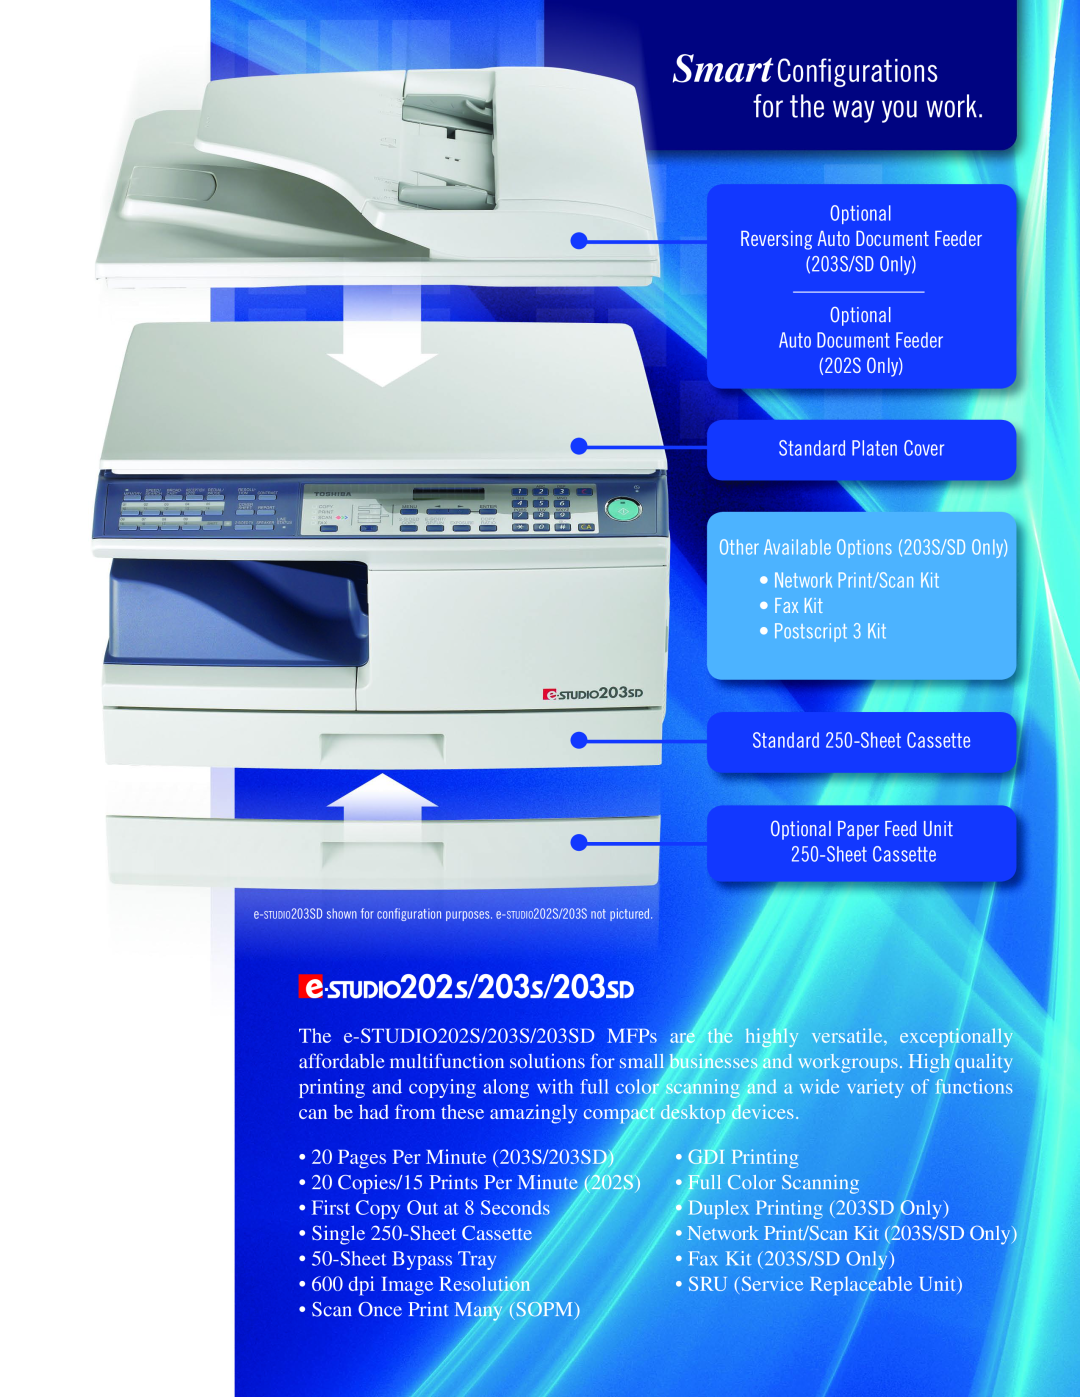 Toshiba e-Studio Copy / Print / Scan / Fax, 202S, 203SD manual SmartConfigurations for the way you work 